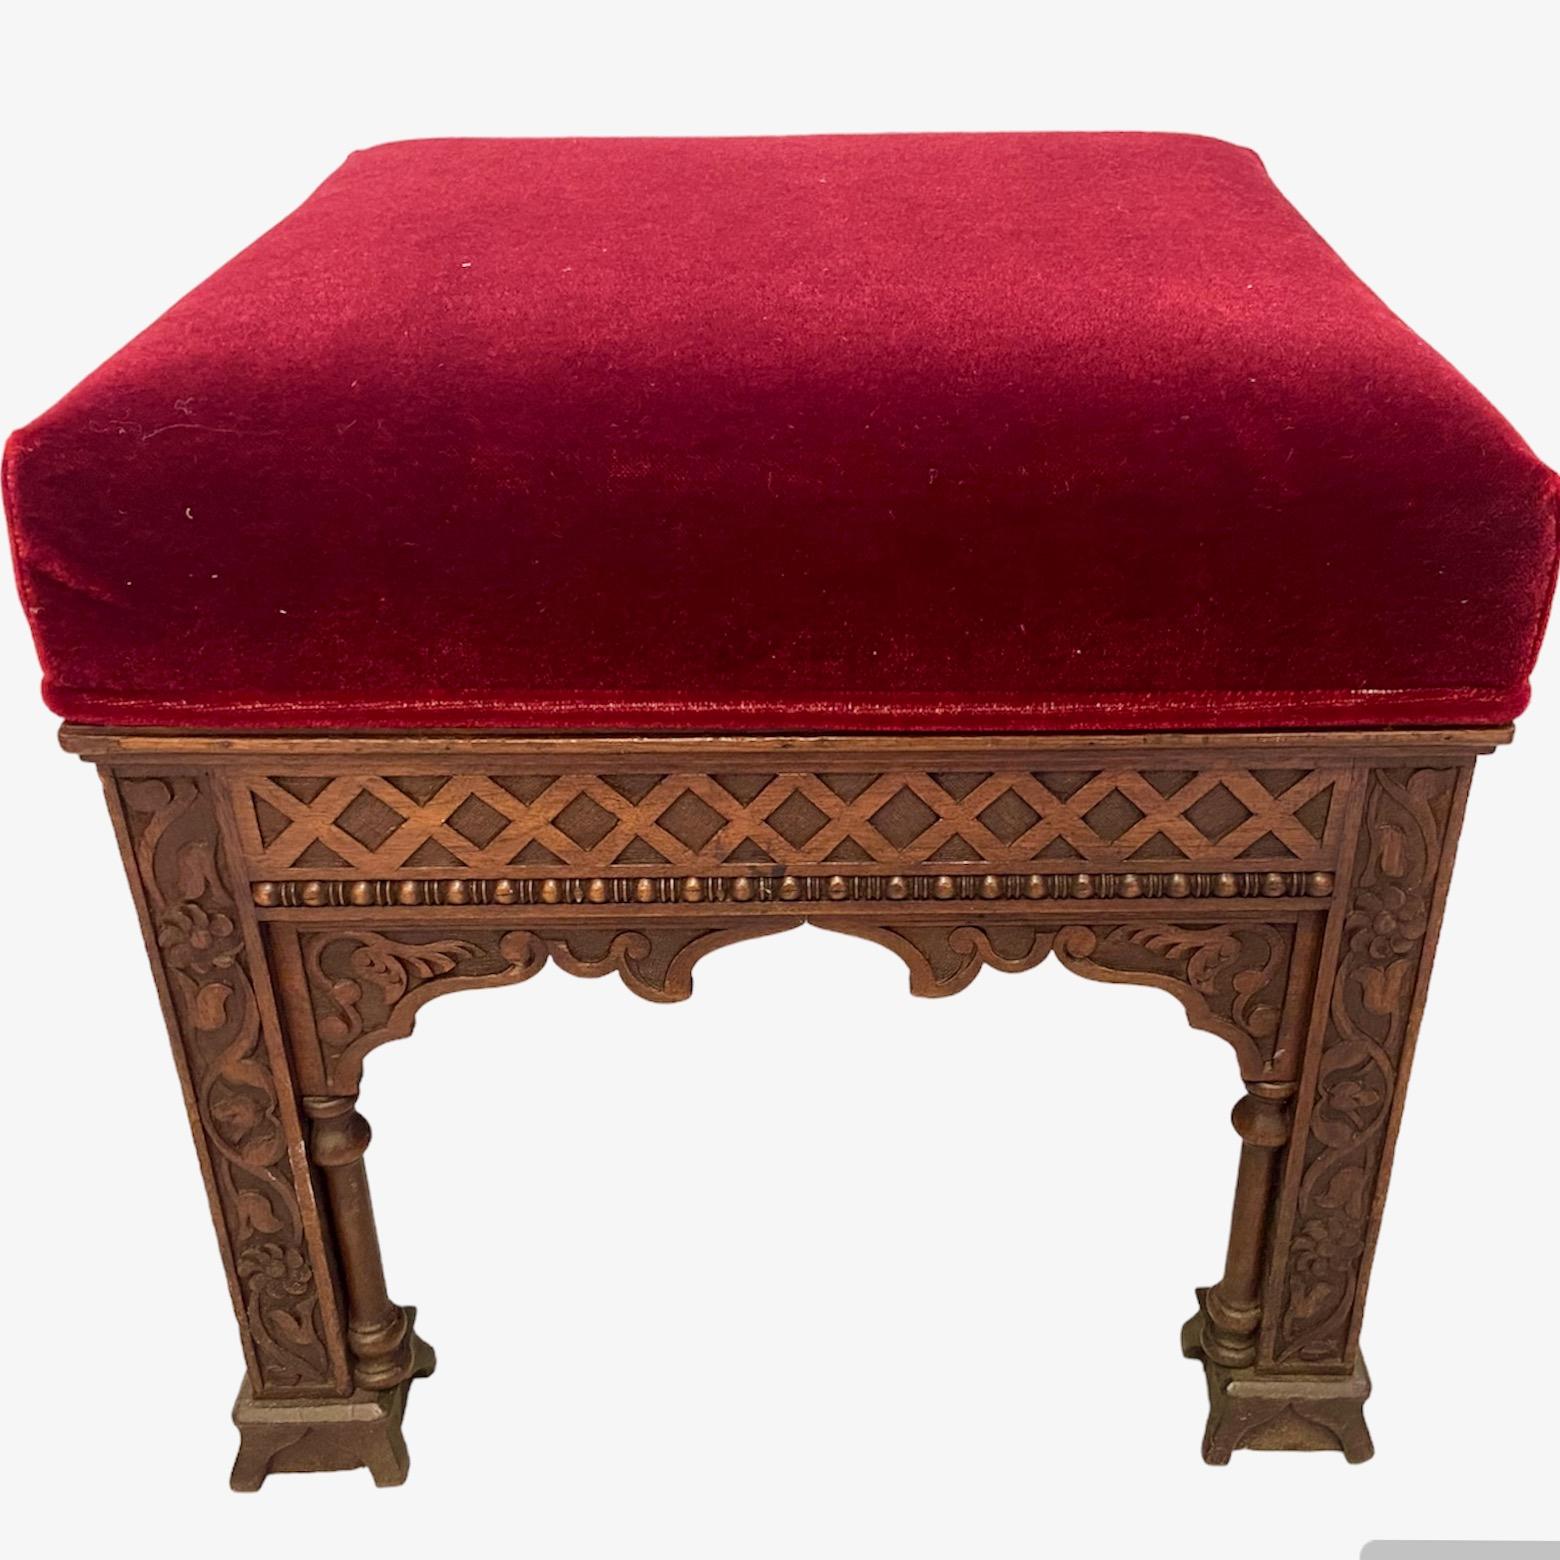 19th Century intricate Victorian, Arts and Crafts Moorish Style Stool, possibly Liberty For Sale